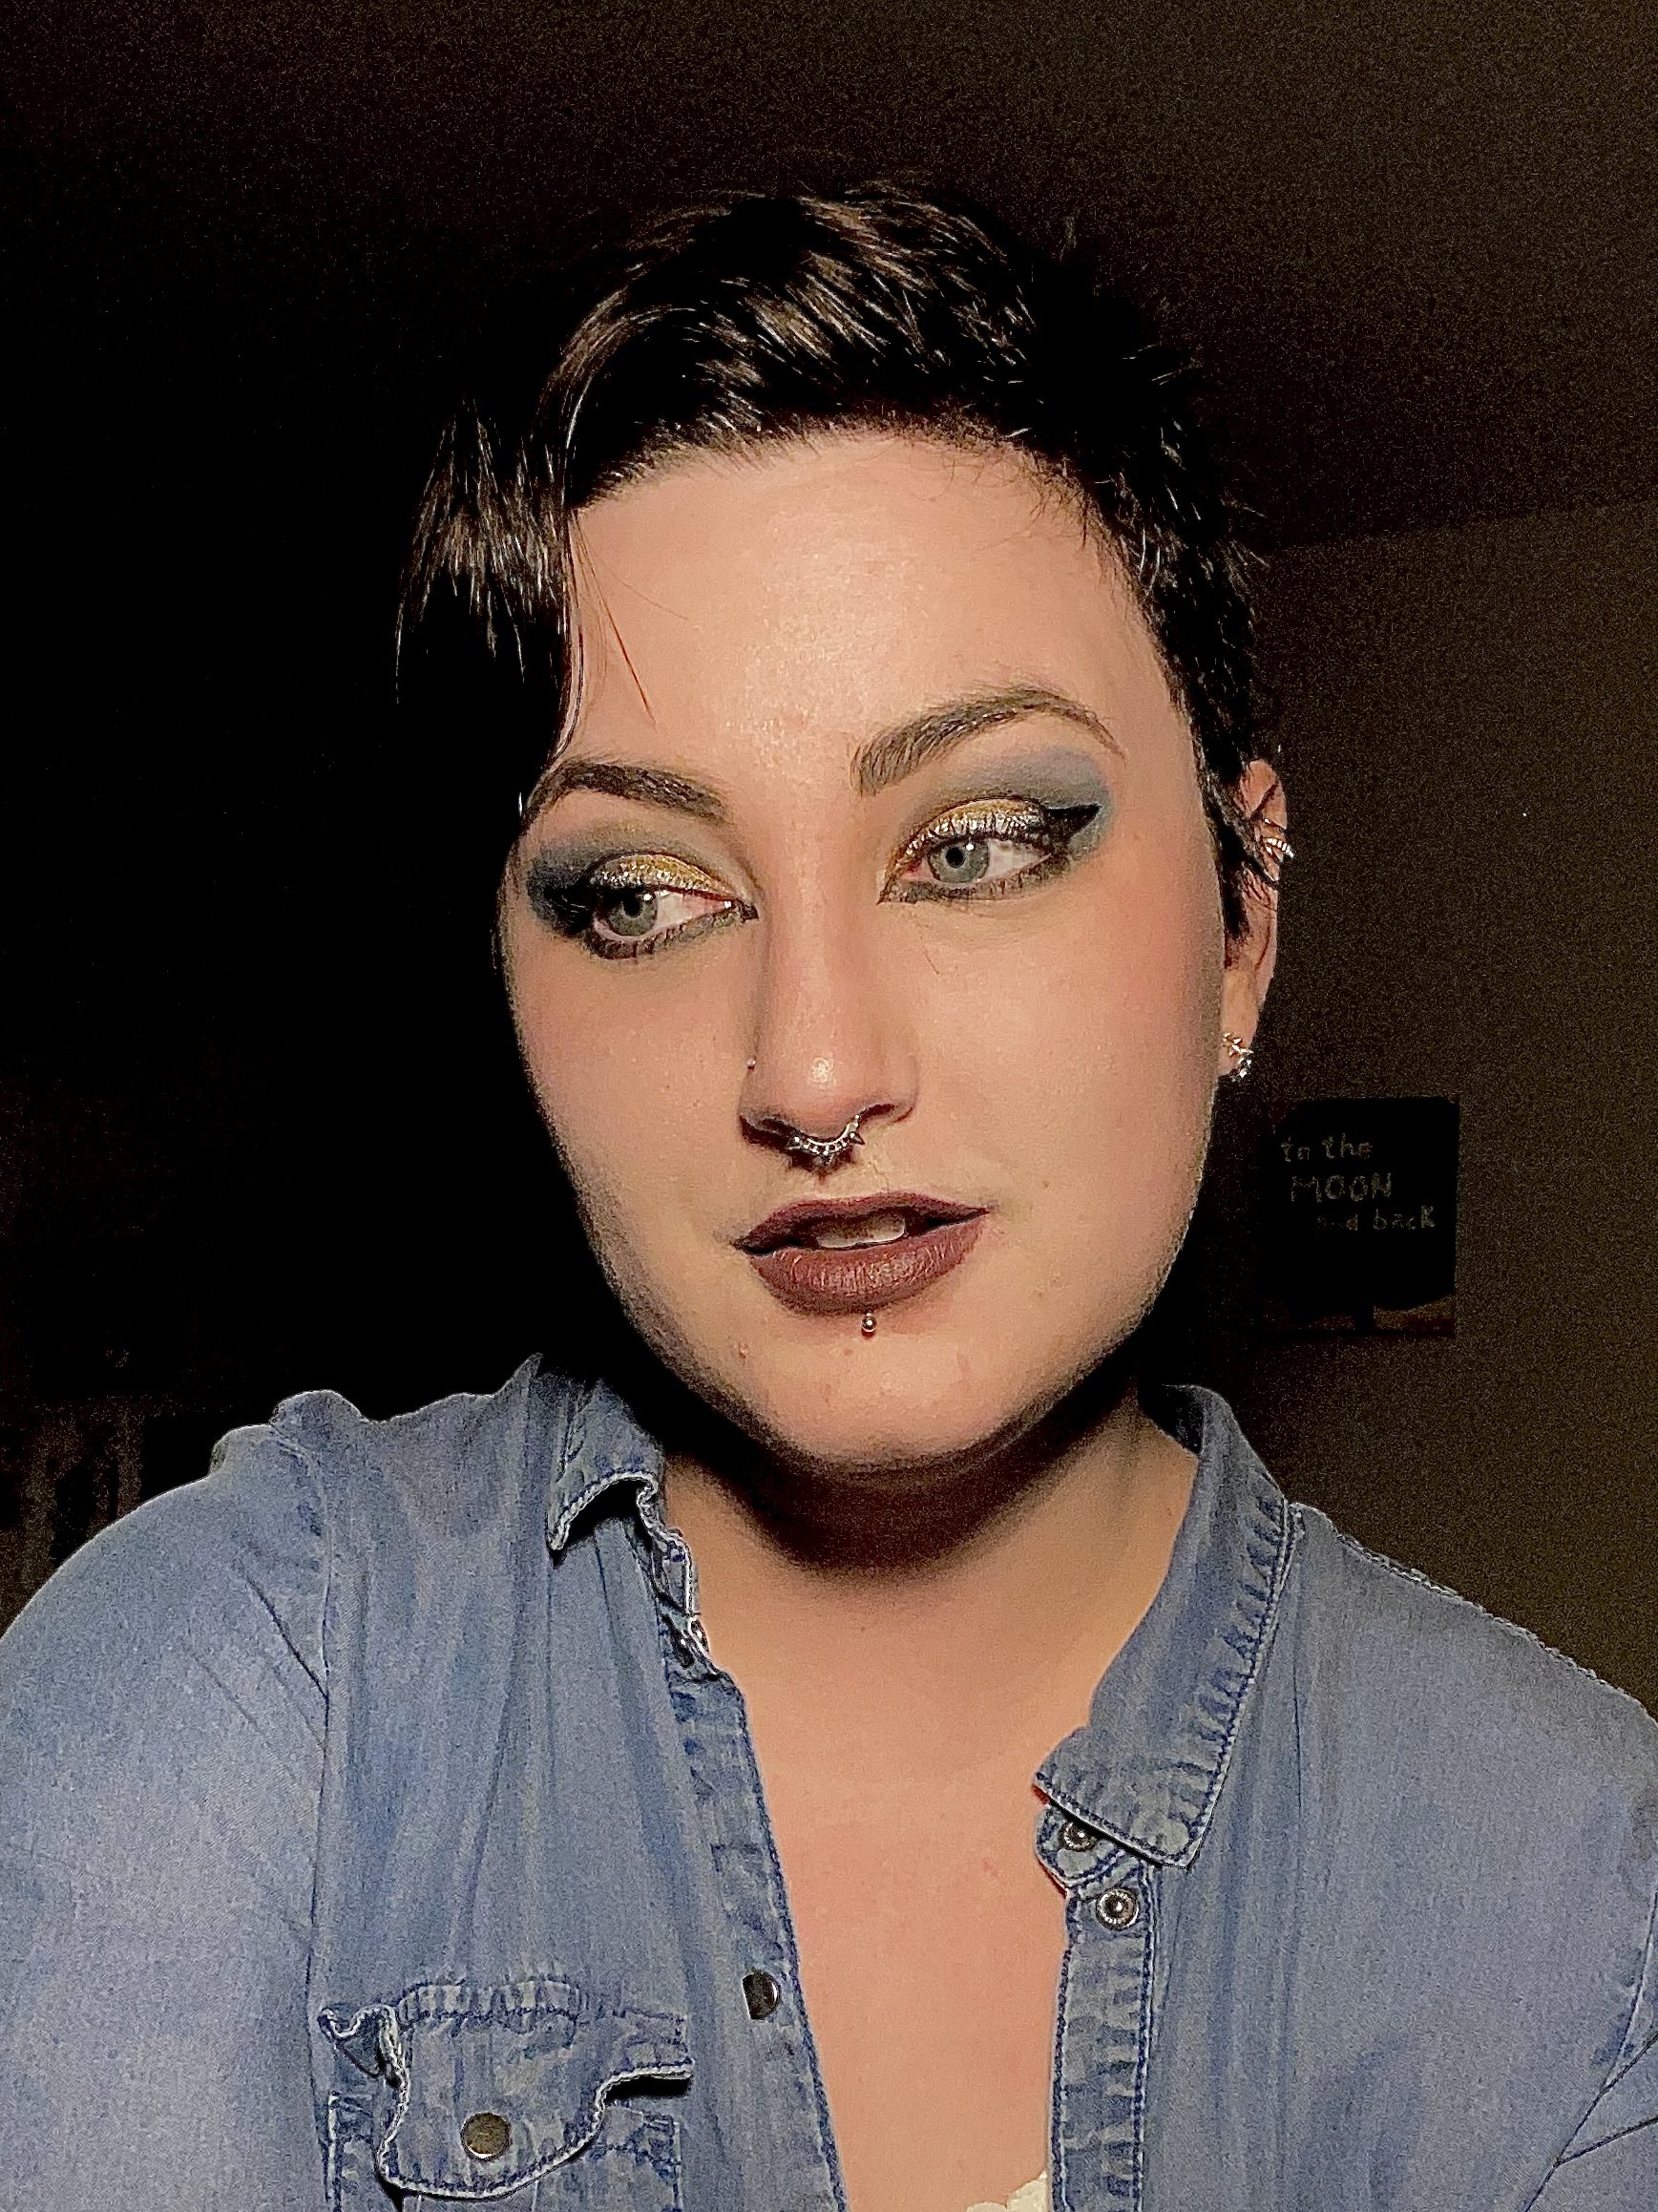 Portrait of Lauren.  Lauren has short brown hair, blue eyes and wears a denim top.  They sport bold eye makeup.  There is bronze shadow on their eyelids surrounded by blue eye shadow spreading out.  Shimmery white lines each upper lid.  Black eyeliner juts out from the outer corners and underlines the eyes, coming to a point below each tear duct.